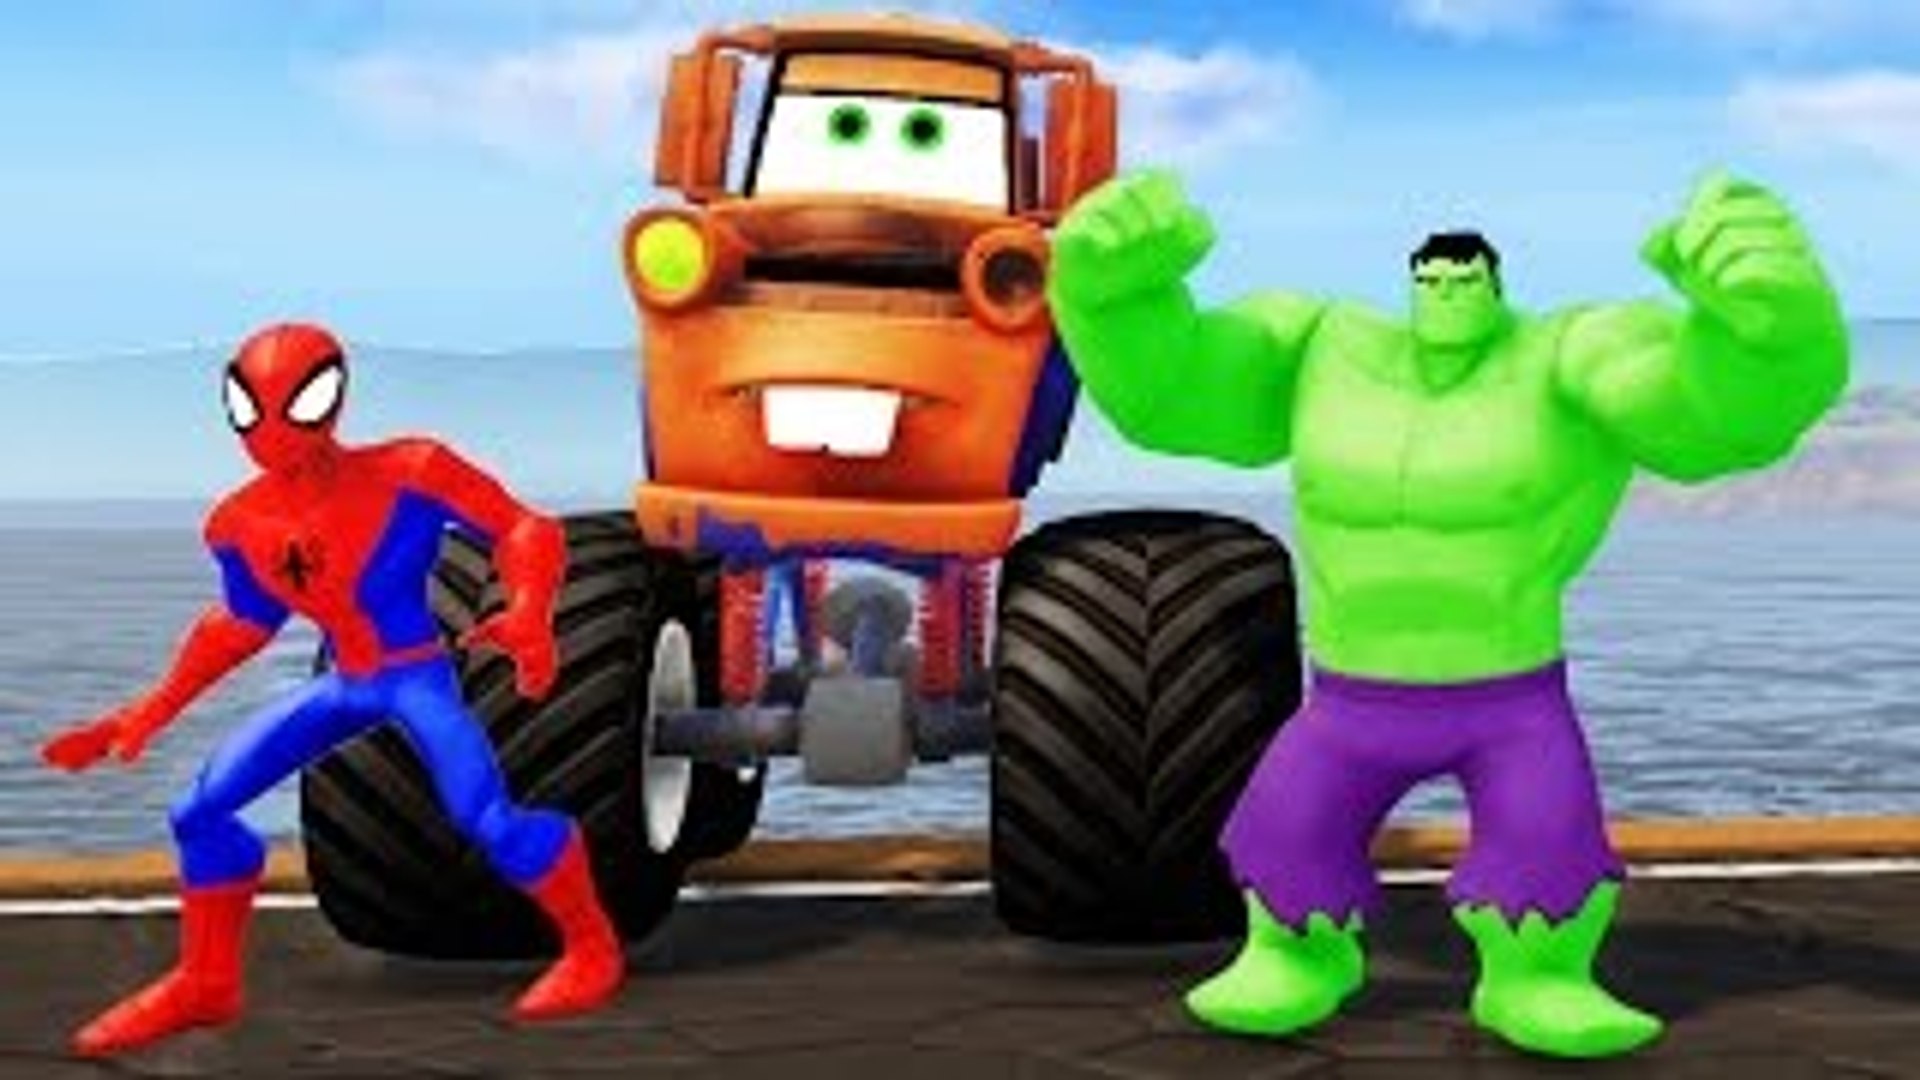 TOW MATER MONSTER TRUCK ! Spiderman & HULK + Nursery Rhymes (Songs for Kids  with Action) - Dailymotion Video